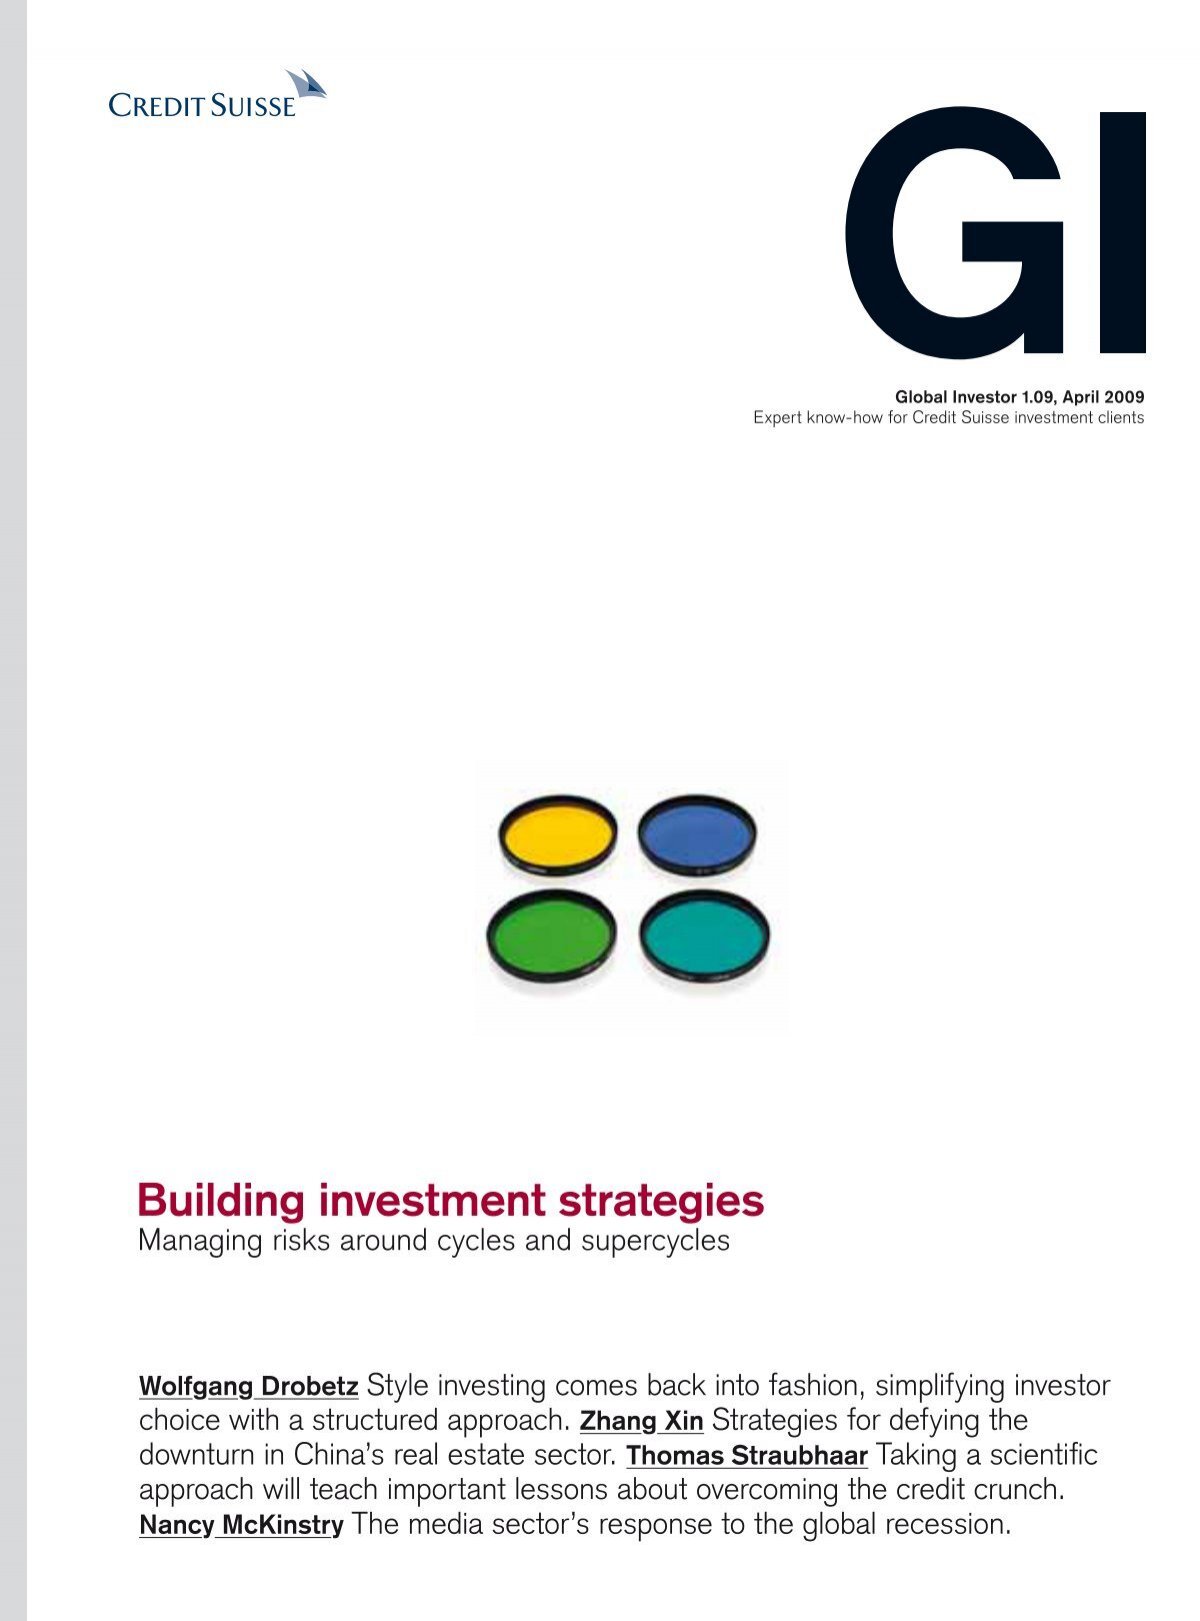 Building Investment Strategies